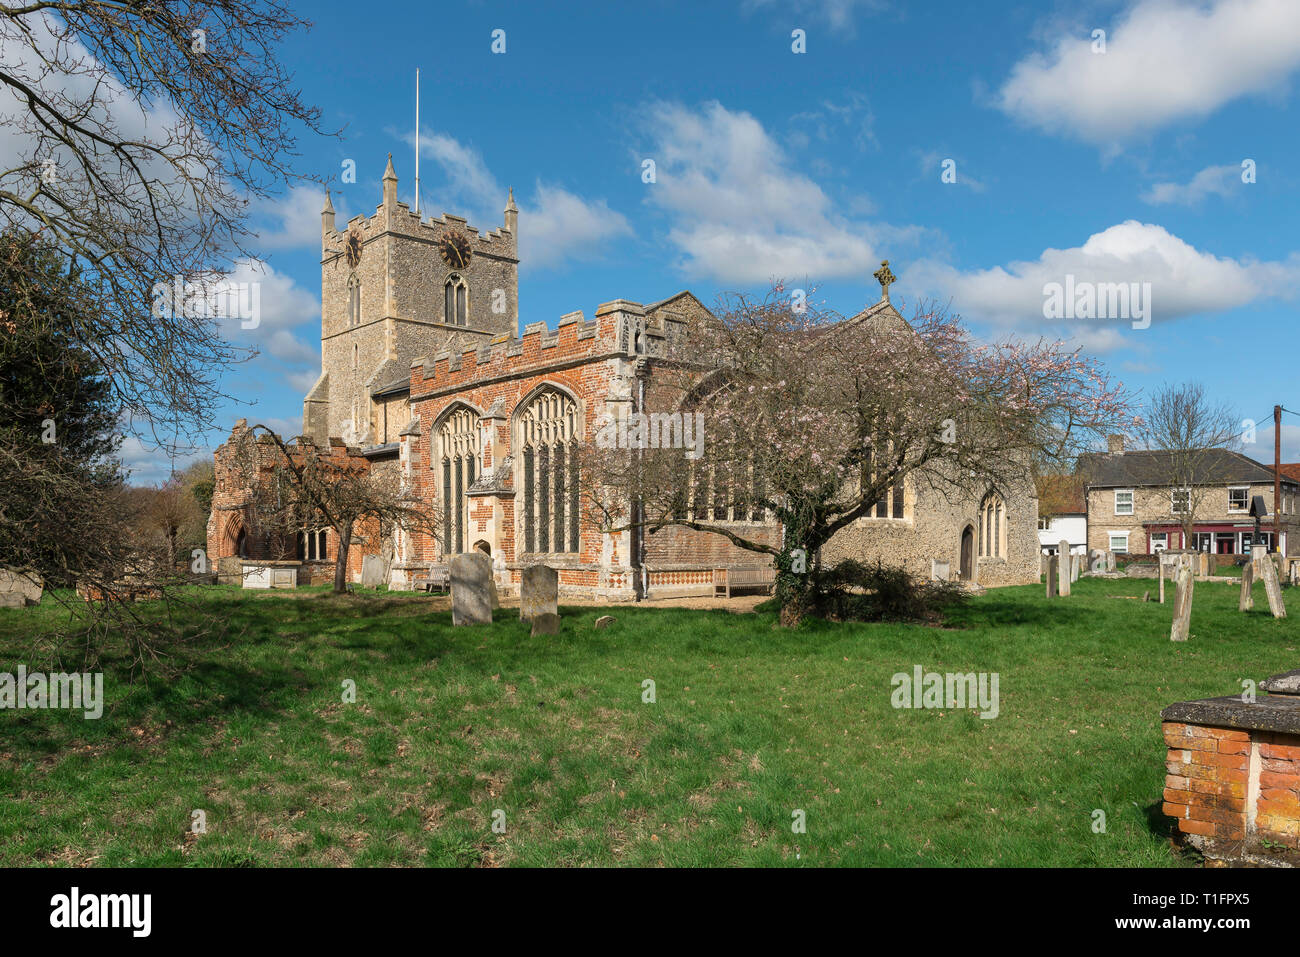 Bures Church Suffolk UK, view of the south side of St Mary's Church in the village of Bures on the Essex Suffolk border, England, UK. Stock Photo